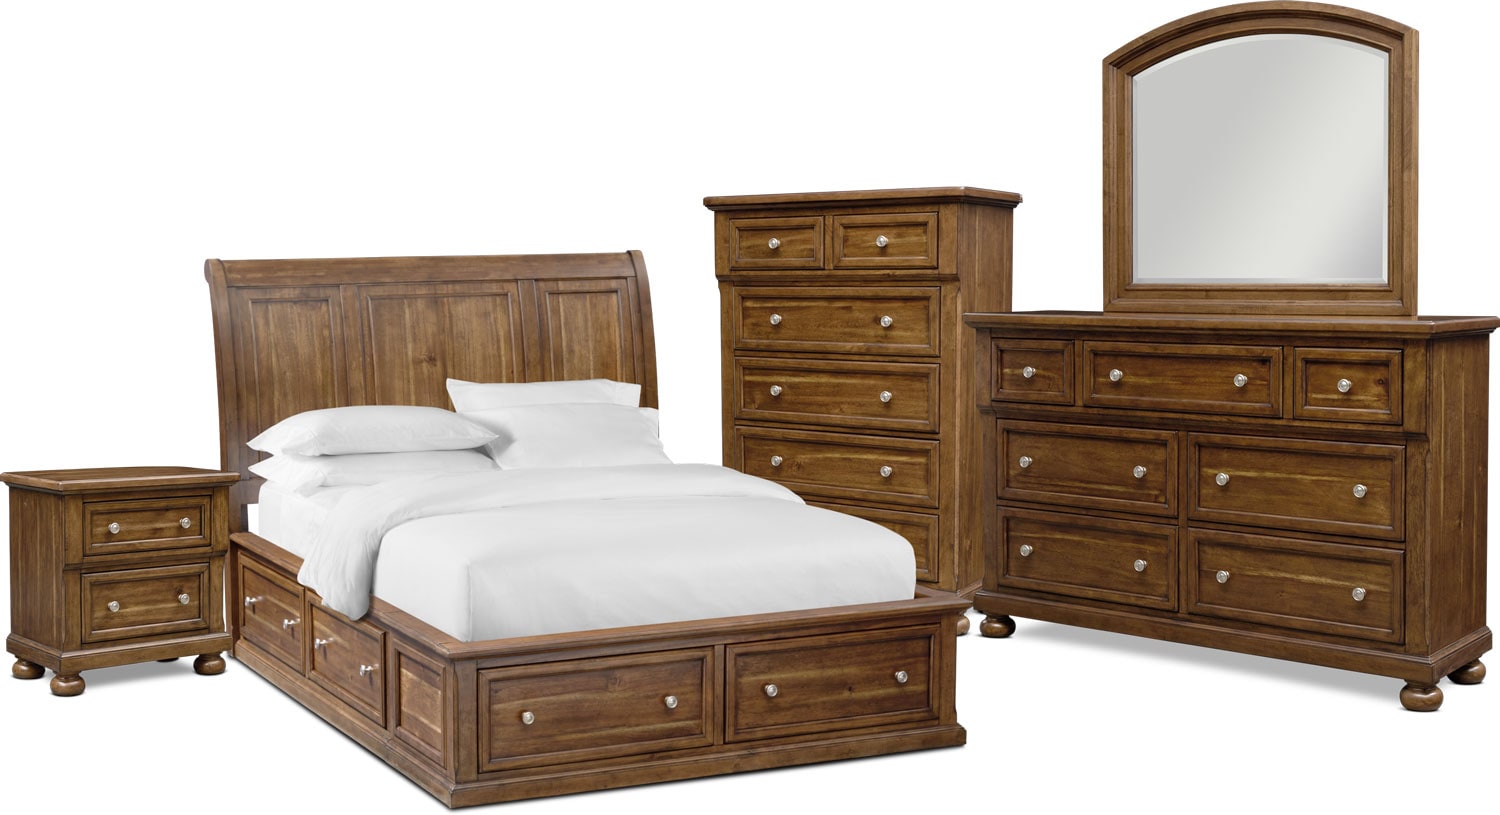 The Hanover Bedroom Collection Value City Furniture And Mattresses